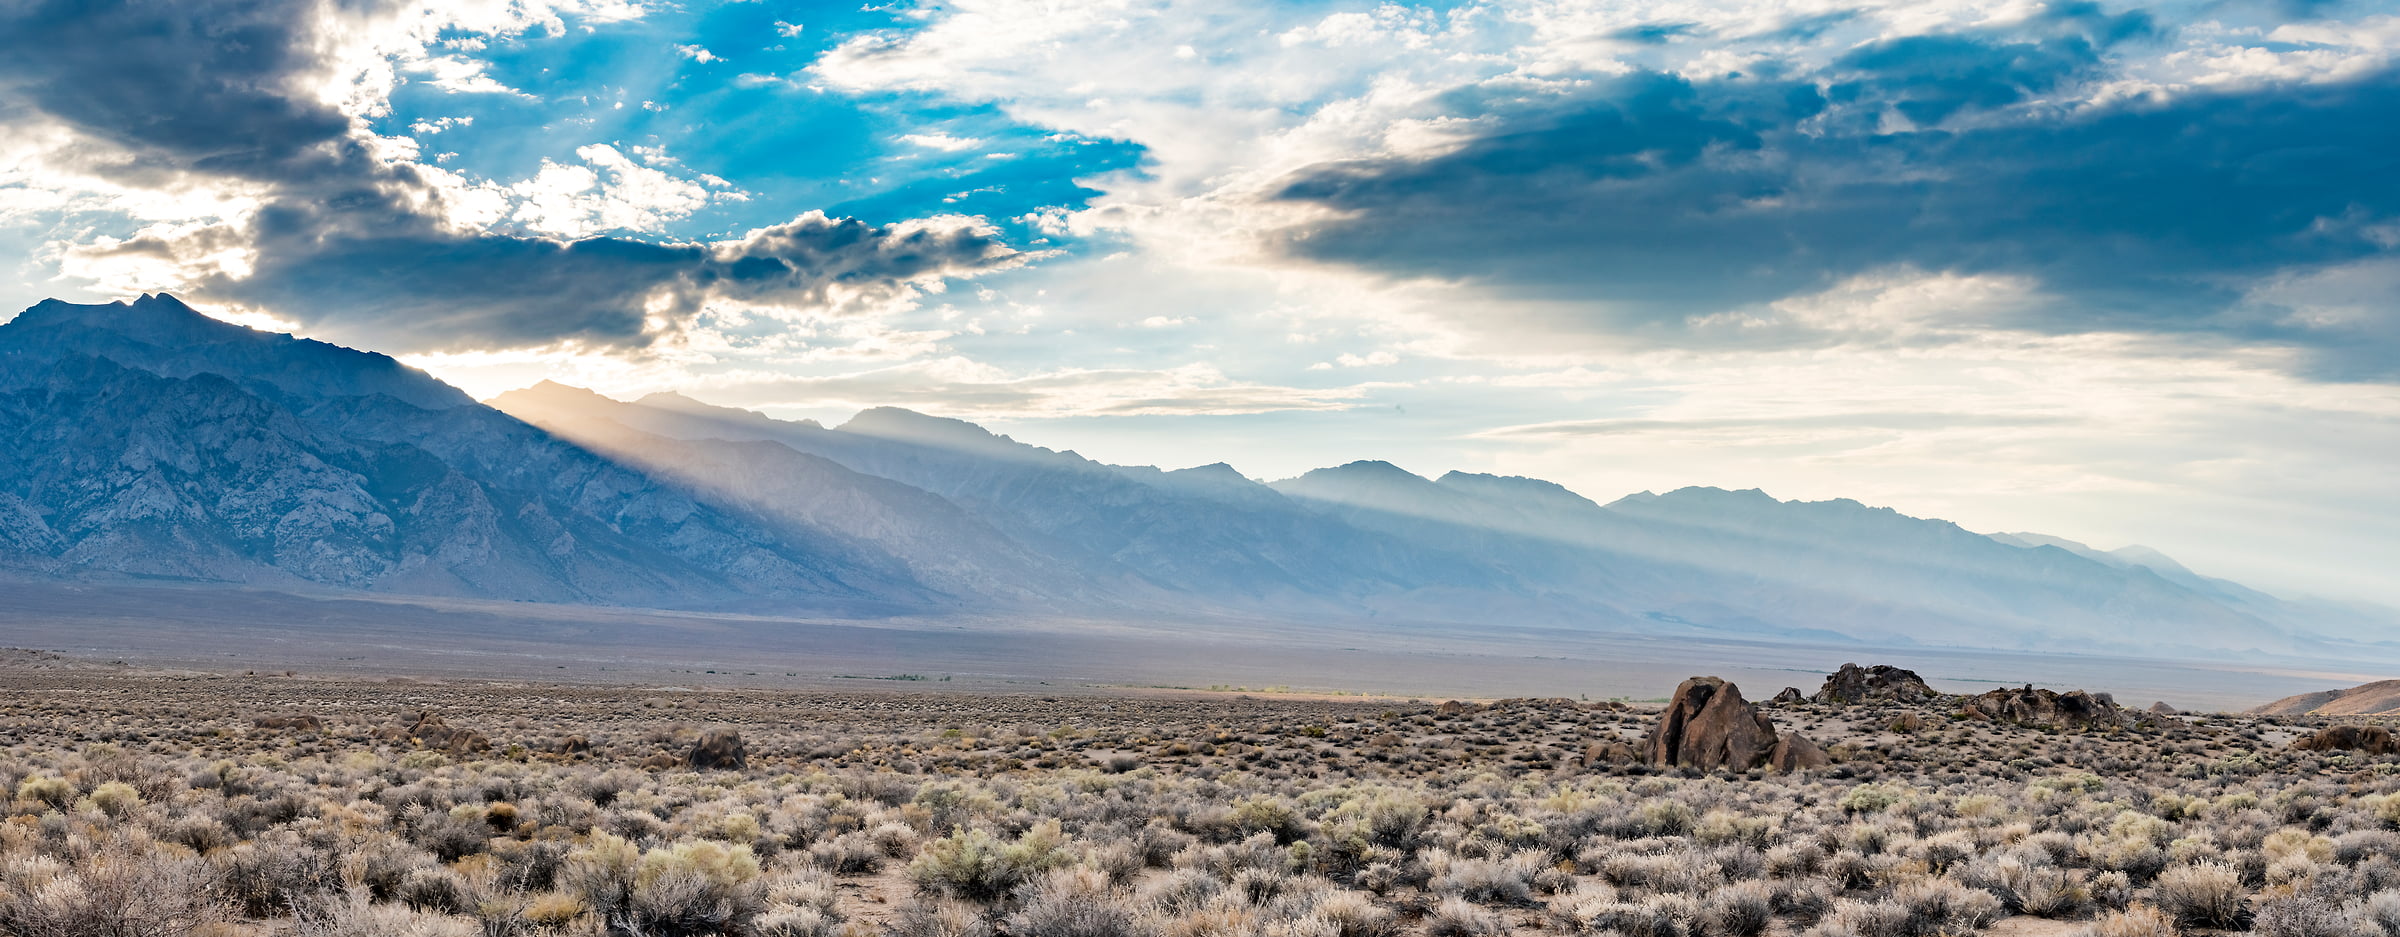 125 megapixels! A very high resolution, large-format VAST photo print of the eastern sierra nevada mountains and Alabama Hills, Lone Pine, California; landscape photo created by Justin Katz.